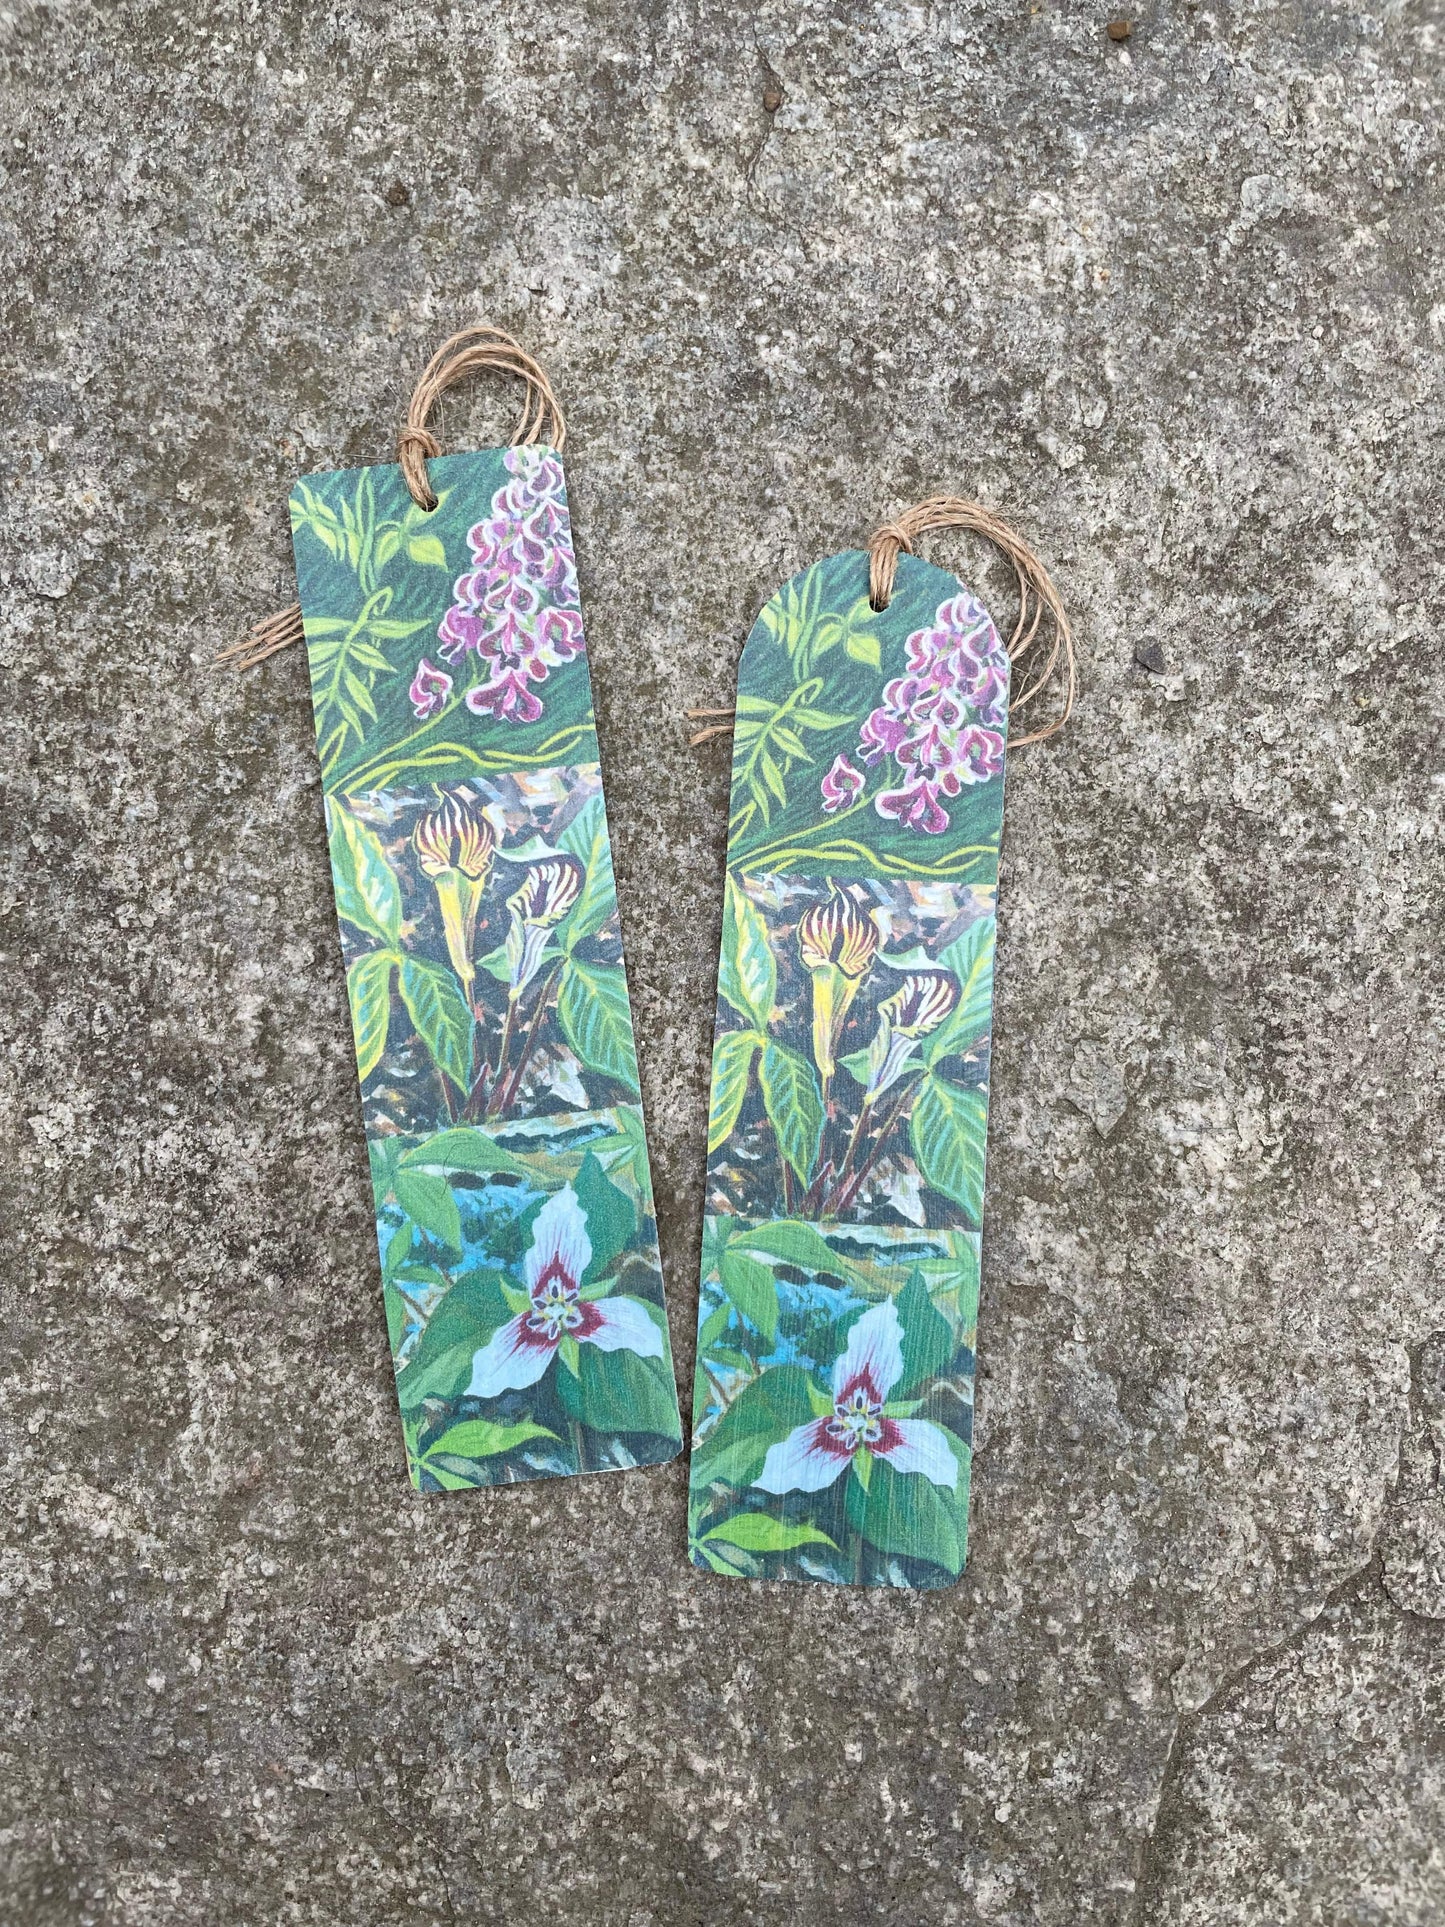 Maine wildflower bookmark with groundnut, jack-in-the-pulpit and trillium. Printed from original paintings by brandy cressey raymond and glued on wood.